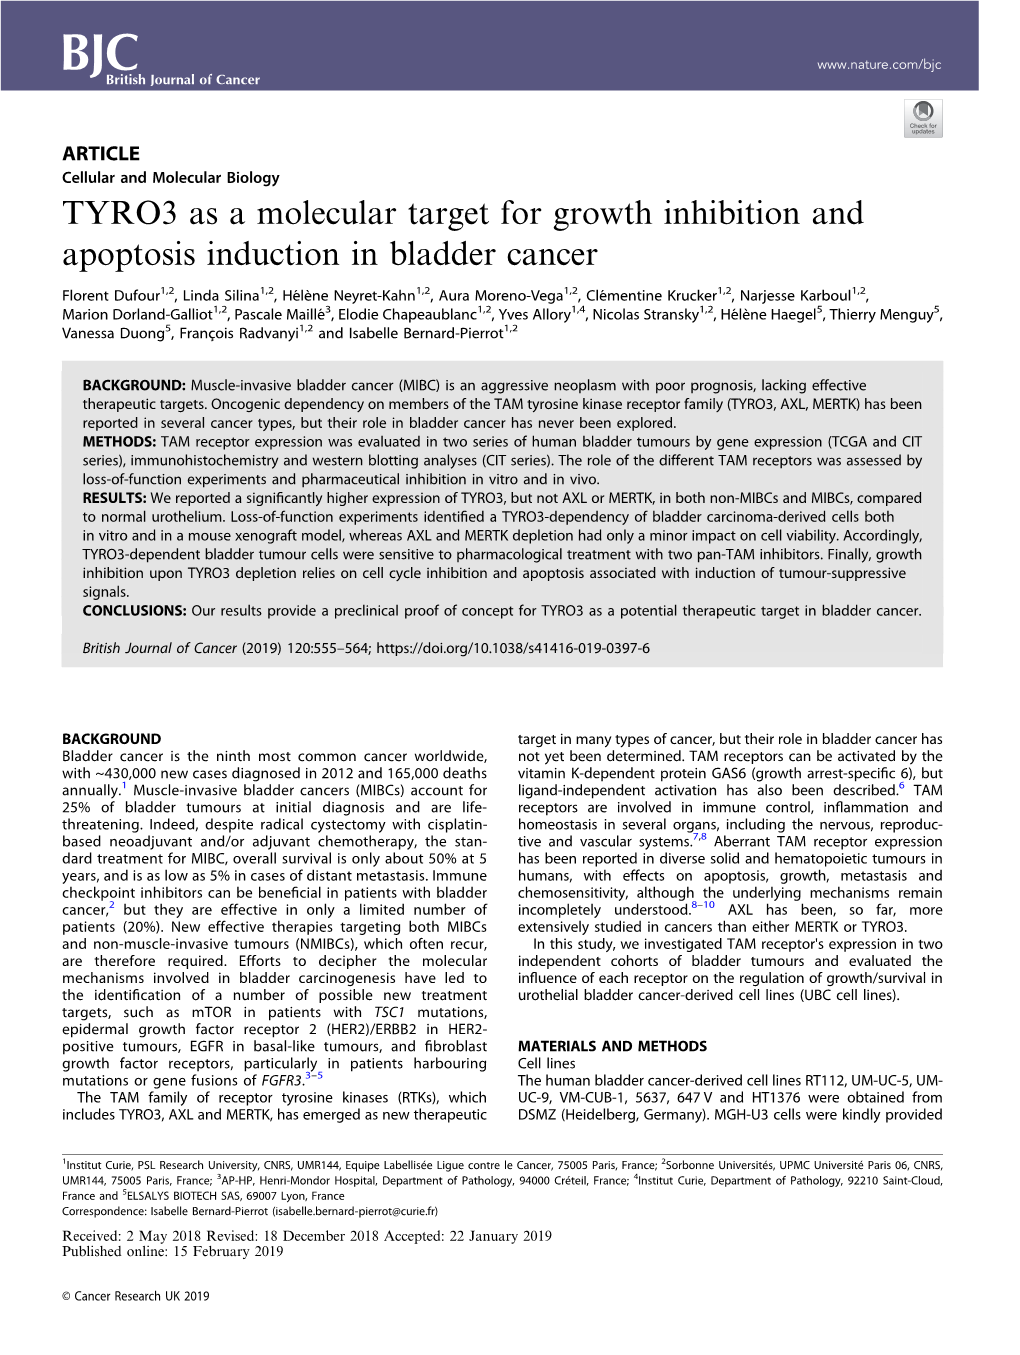 TYRO3 As a Molecular Target for Growth Inhibition and Apoptosis Induction in Bladder Cancer